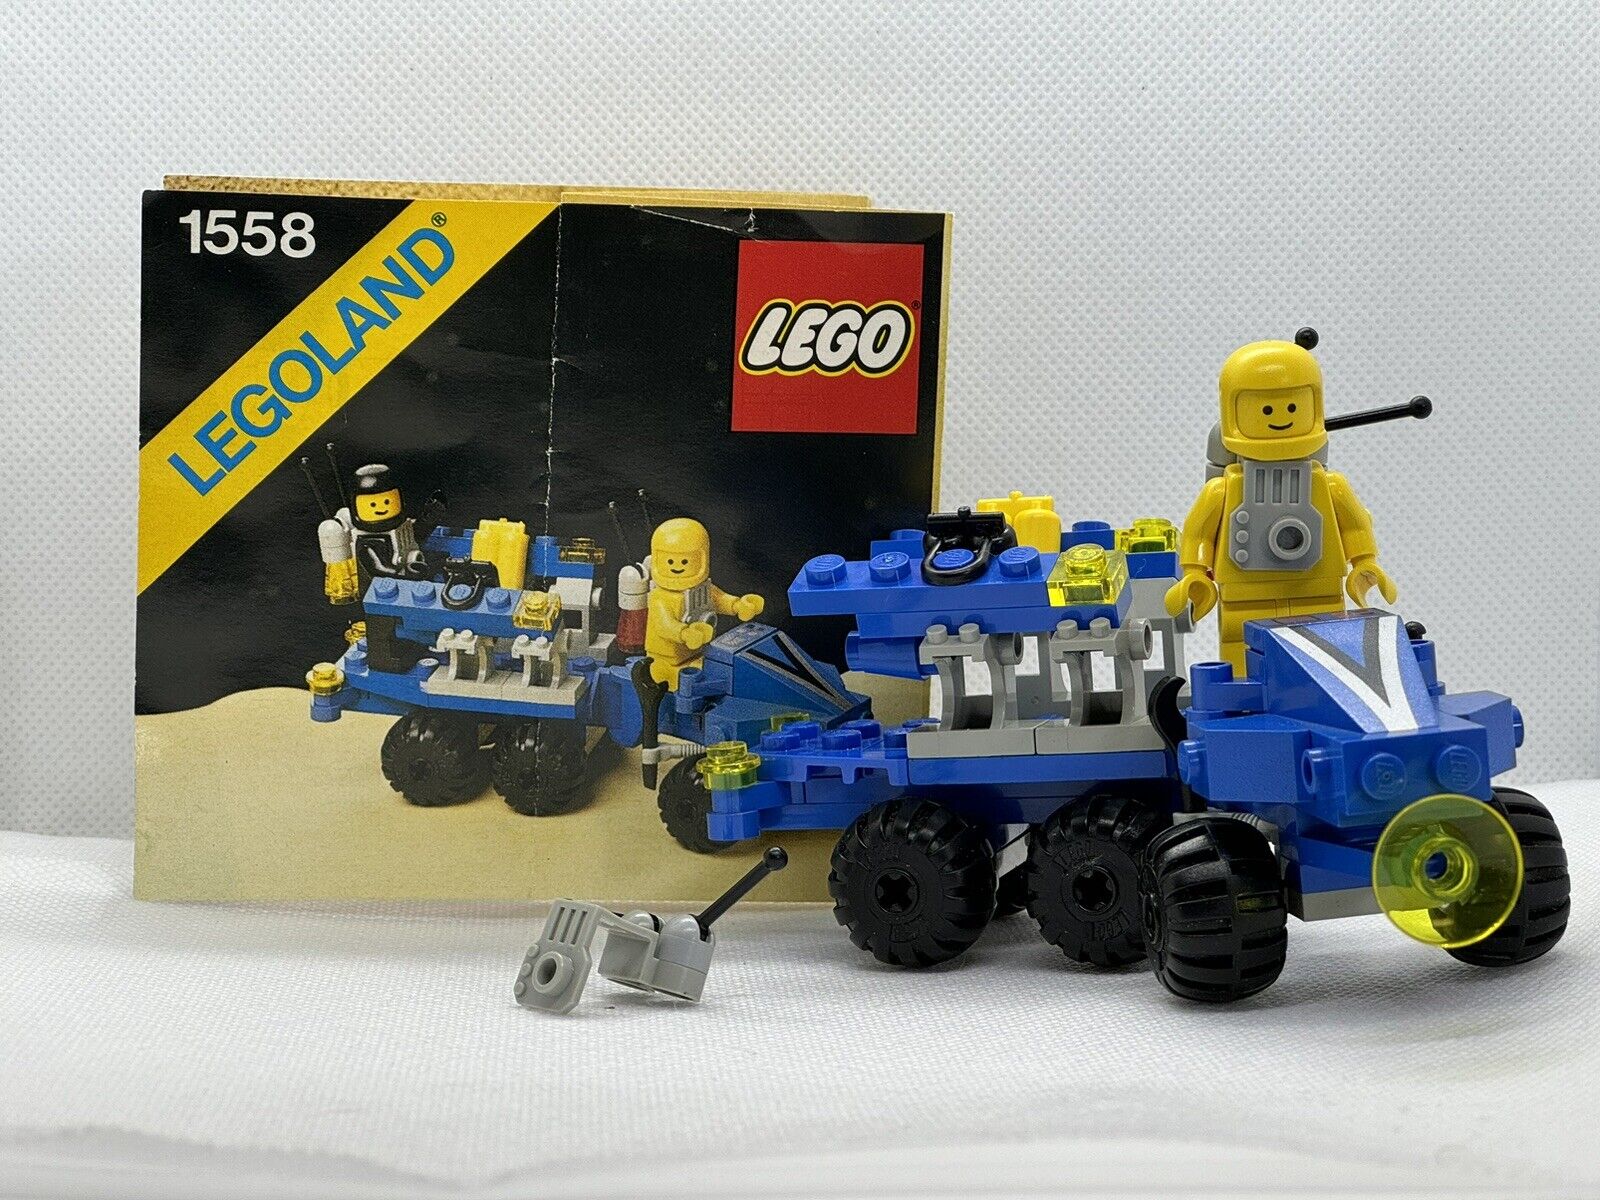 VINTAGE LEGO SPACE 1558 MOBILE COMMAND TRAILER PARTS 99% COMPLETE w MANUAL READ